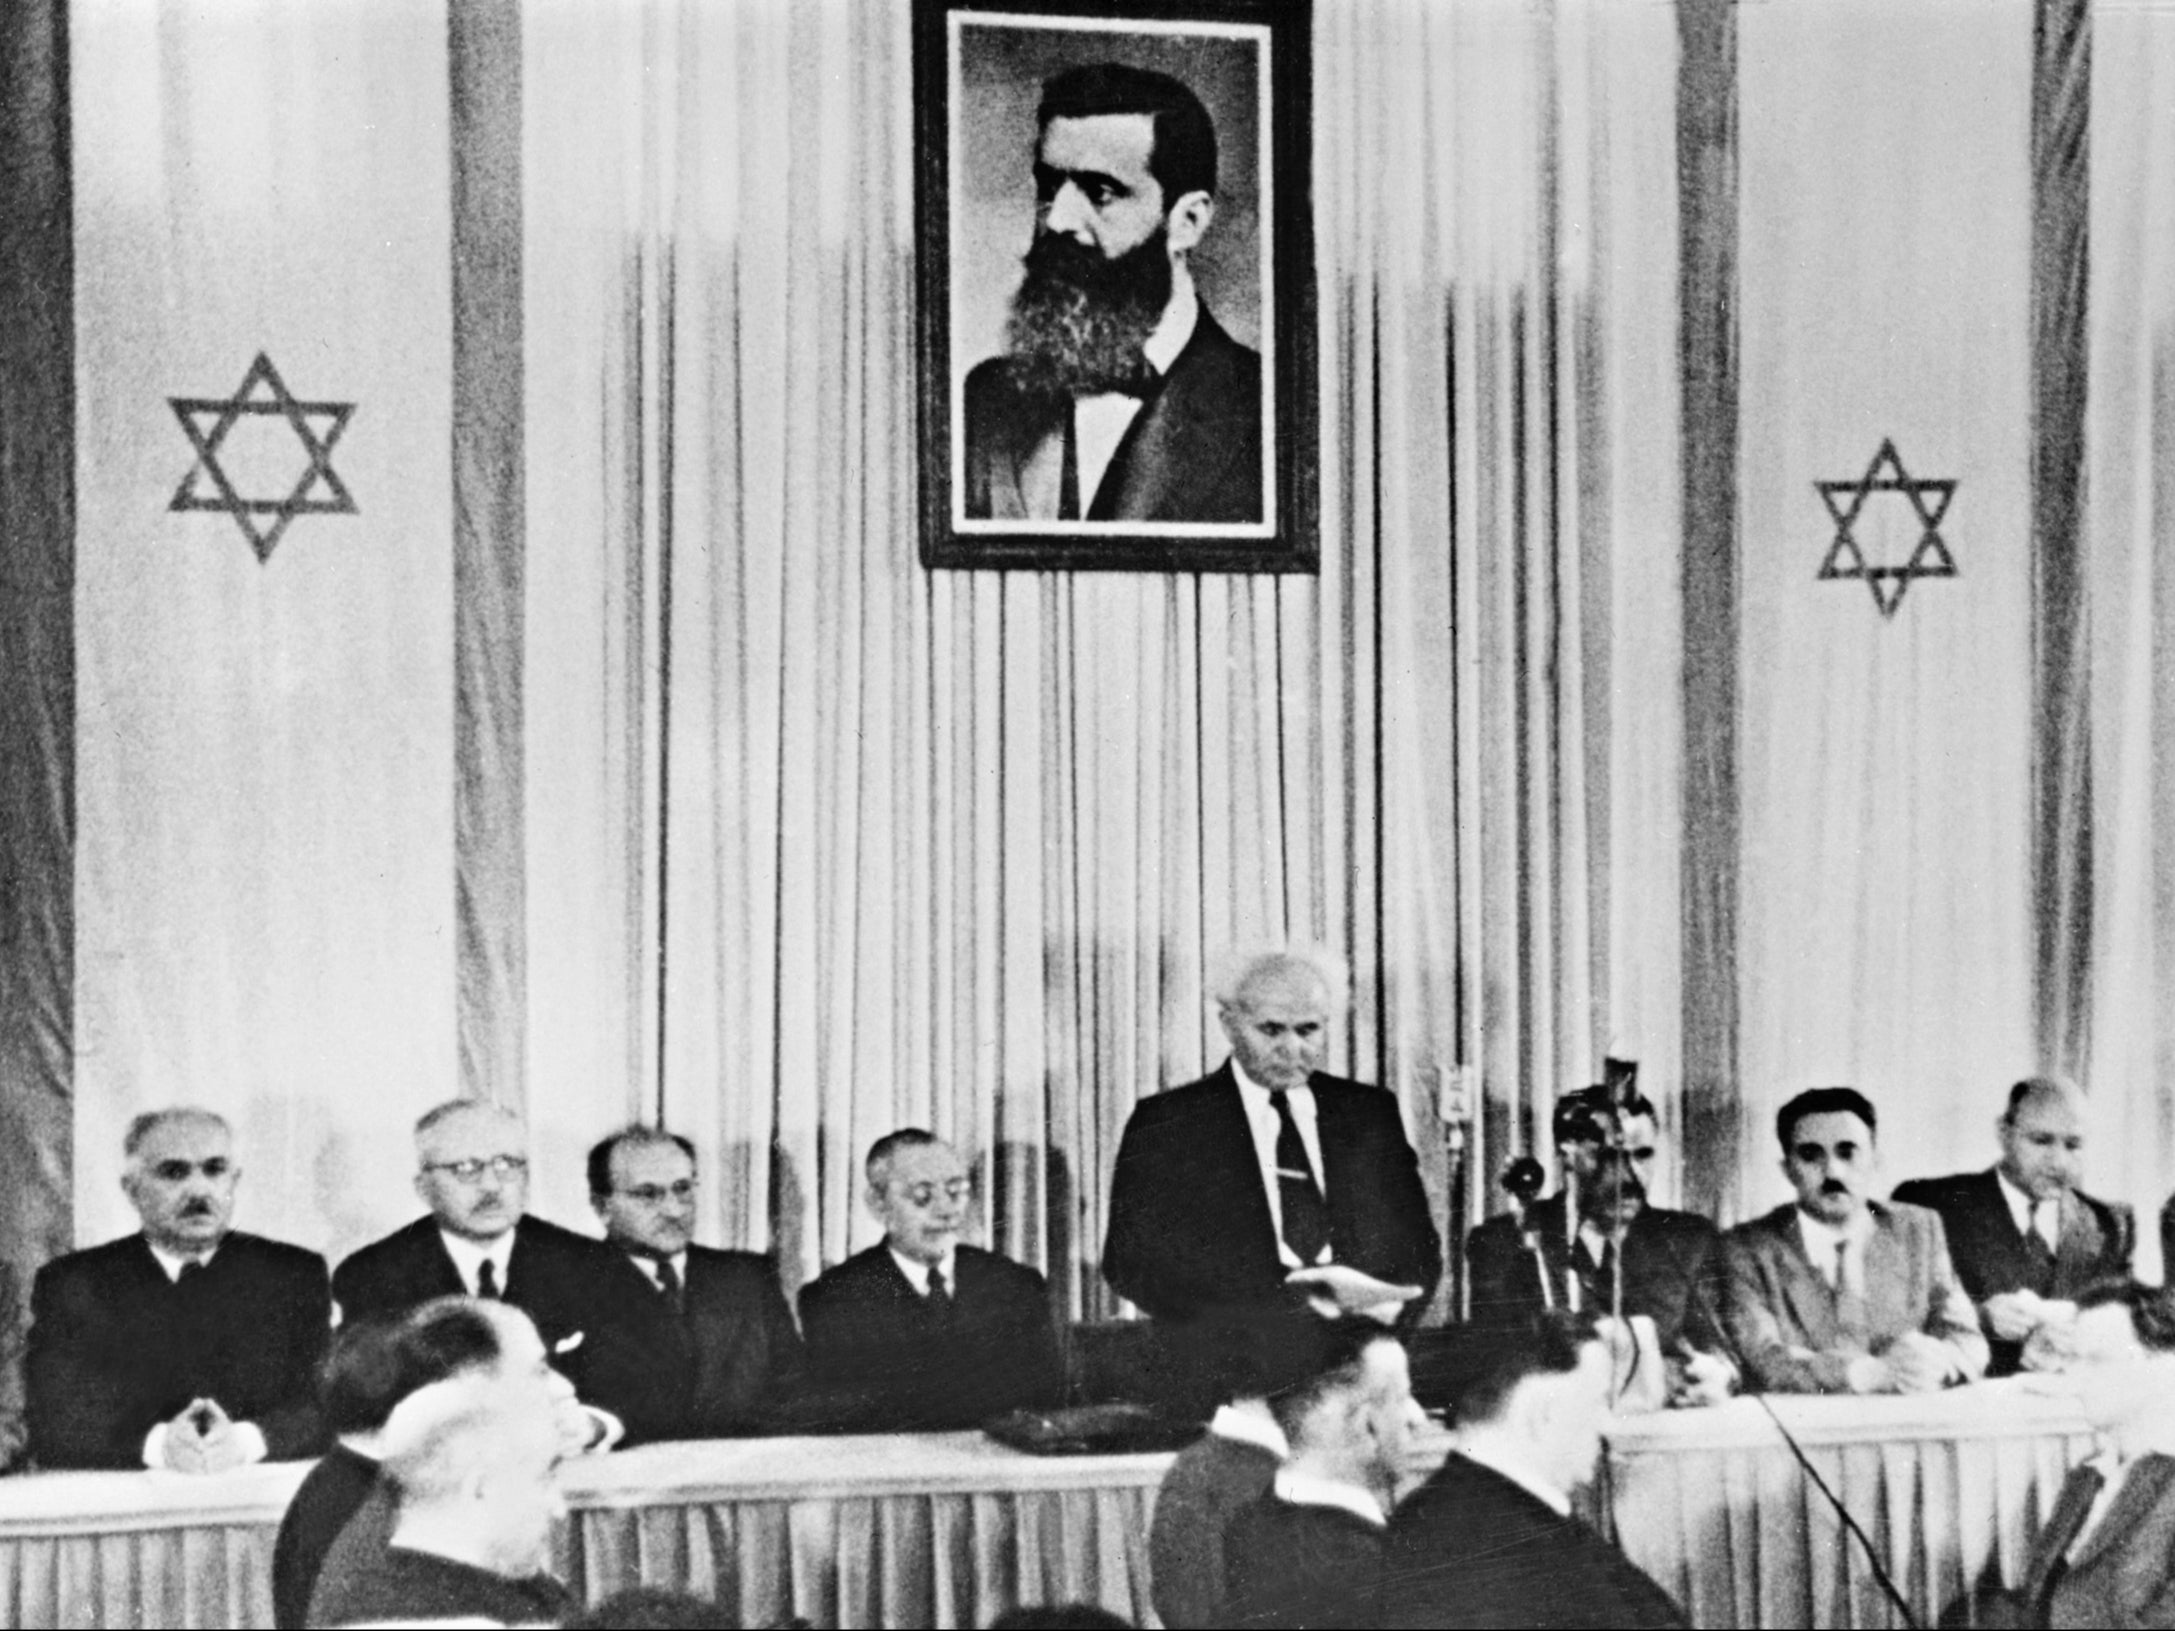 The first Israeli prime minister David Ben-Gurion officially proclaims the state of Israel in Tel Aviv in 1948